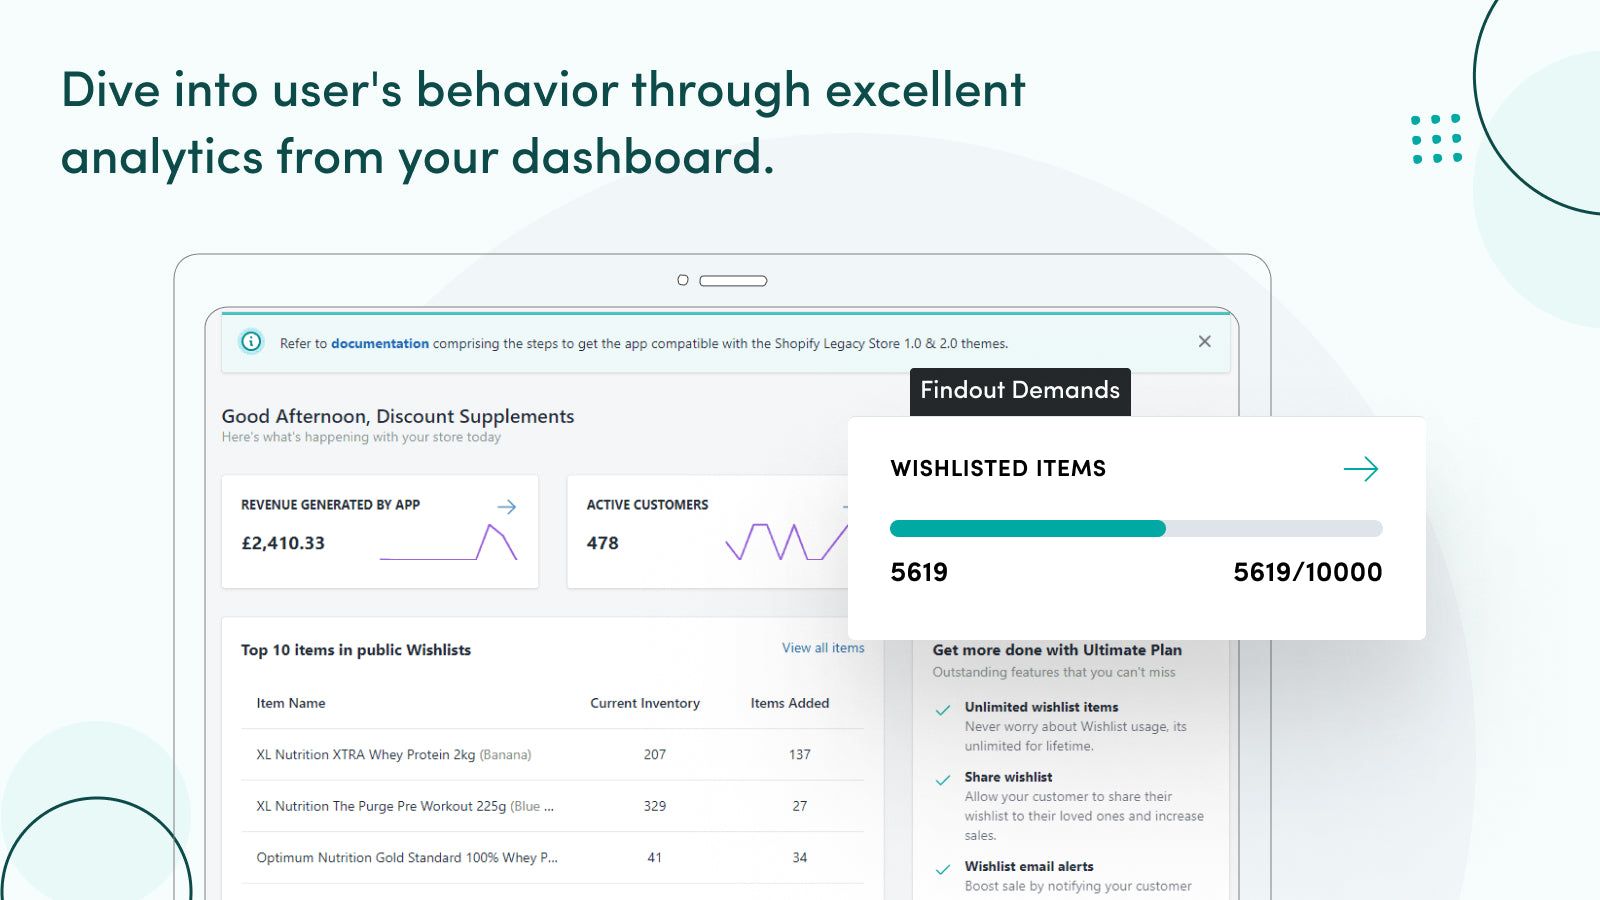 Dive into users' behavior through your wishlist dashboard.